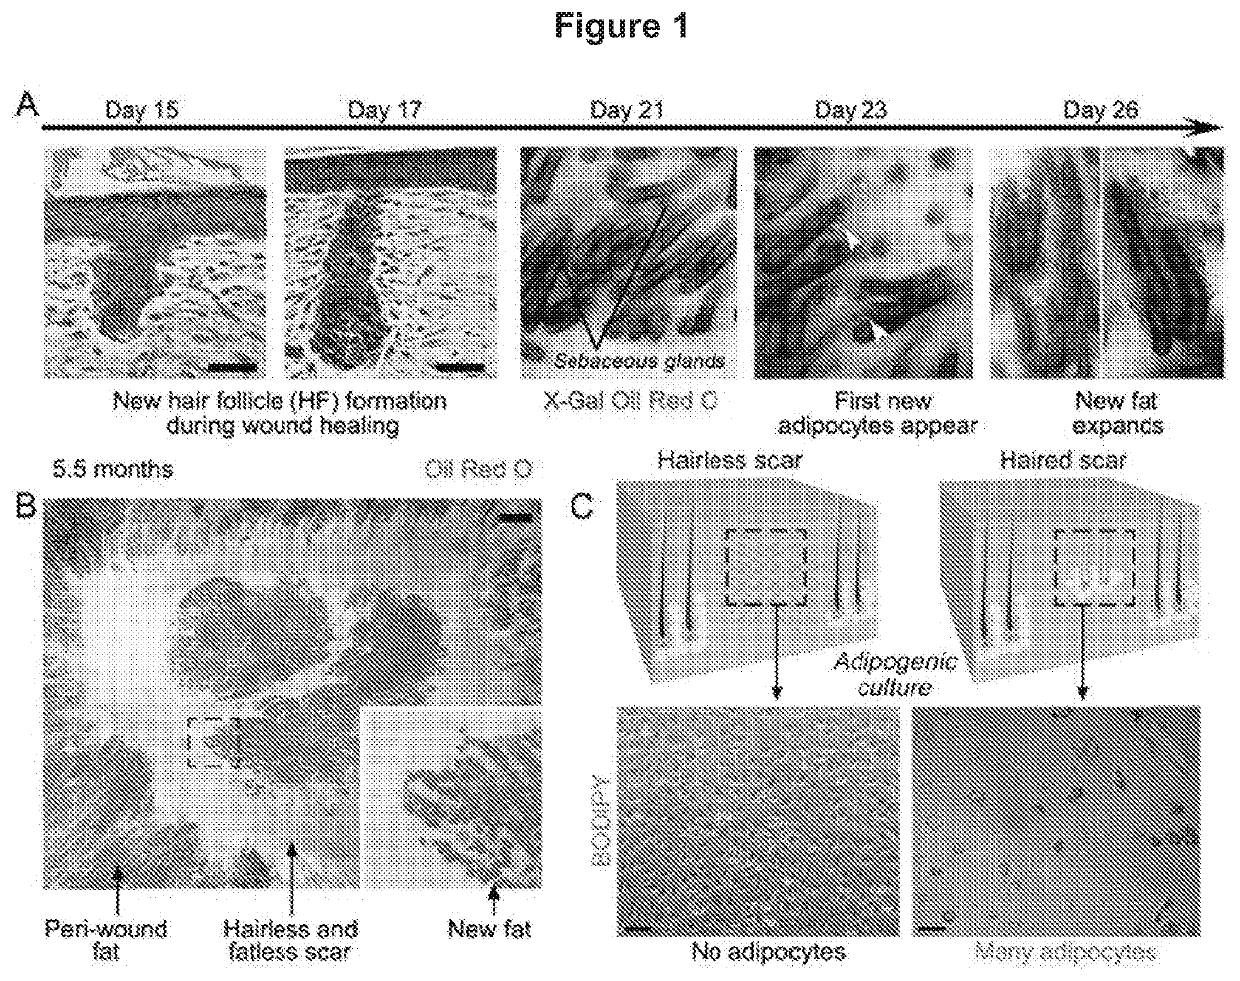 Methods for scar reduction by converting scar fibroblasts into adipocytes with hair follicle-derived signals